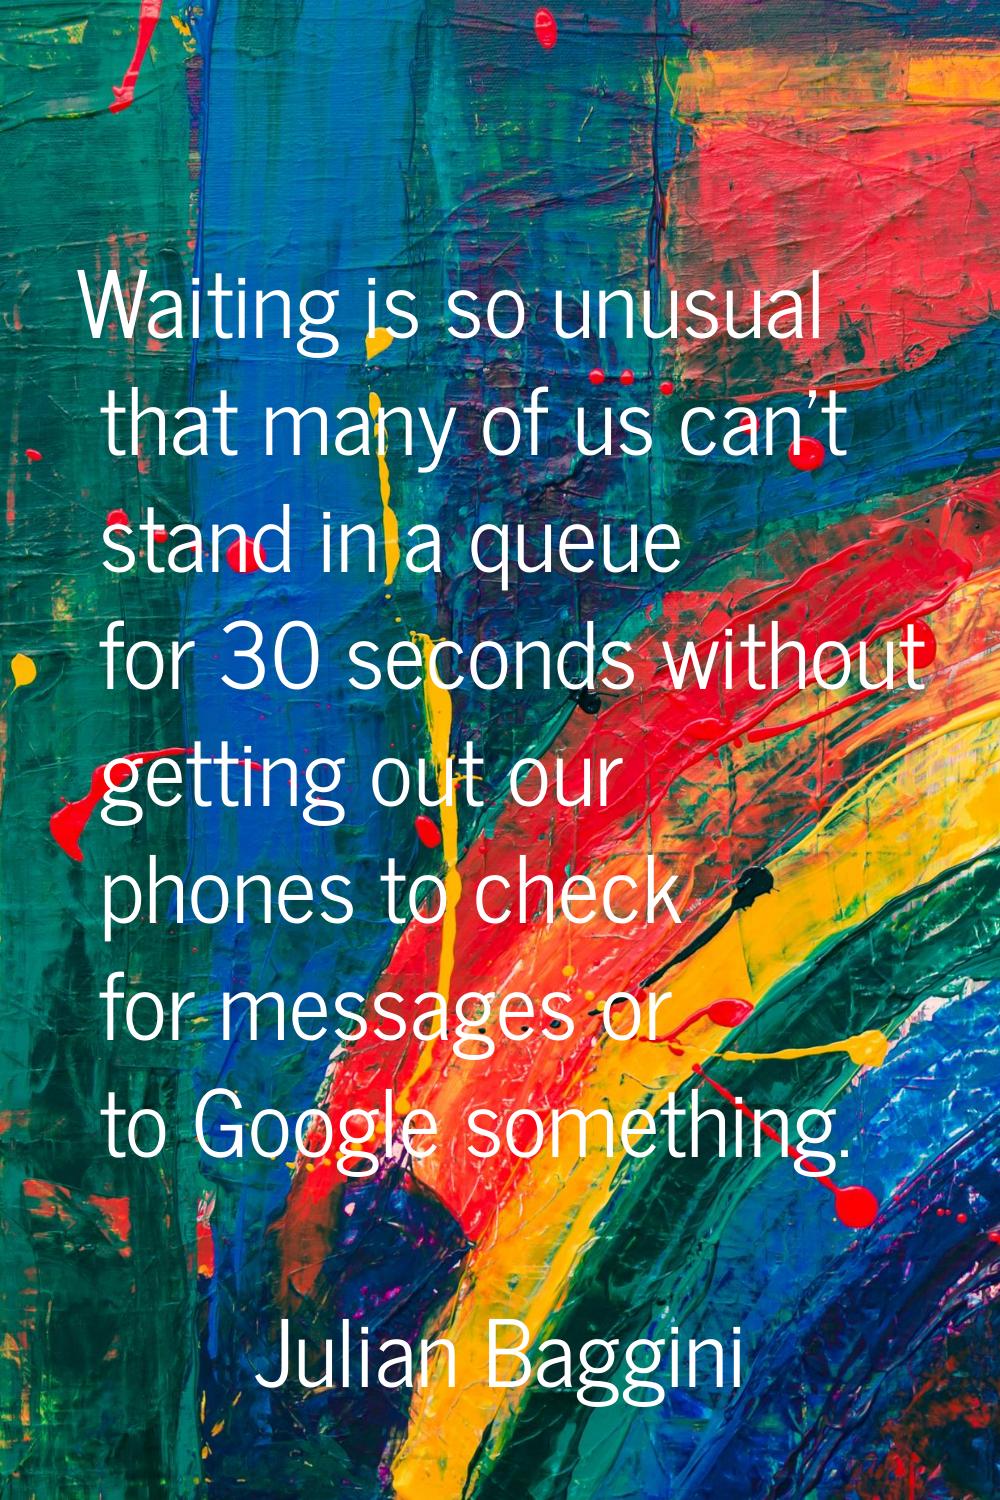 Waiting is so unusual that many of us can't stand in a queue for 30 seconds without getting out our